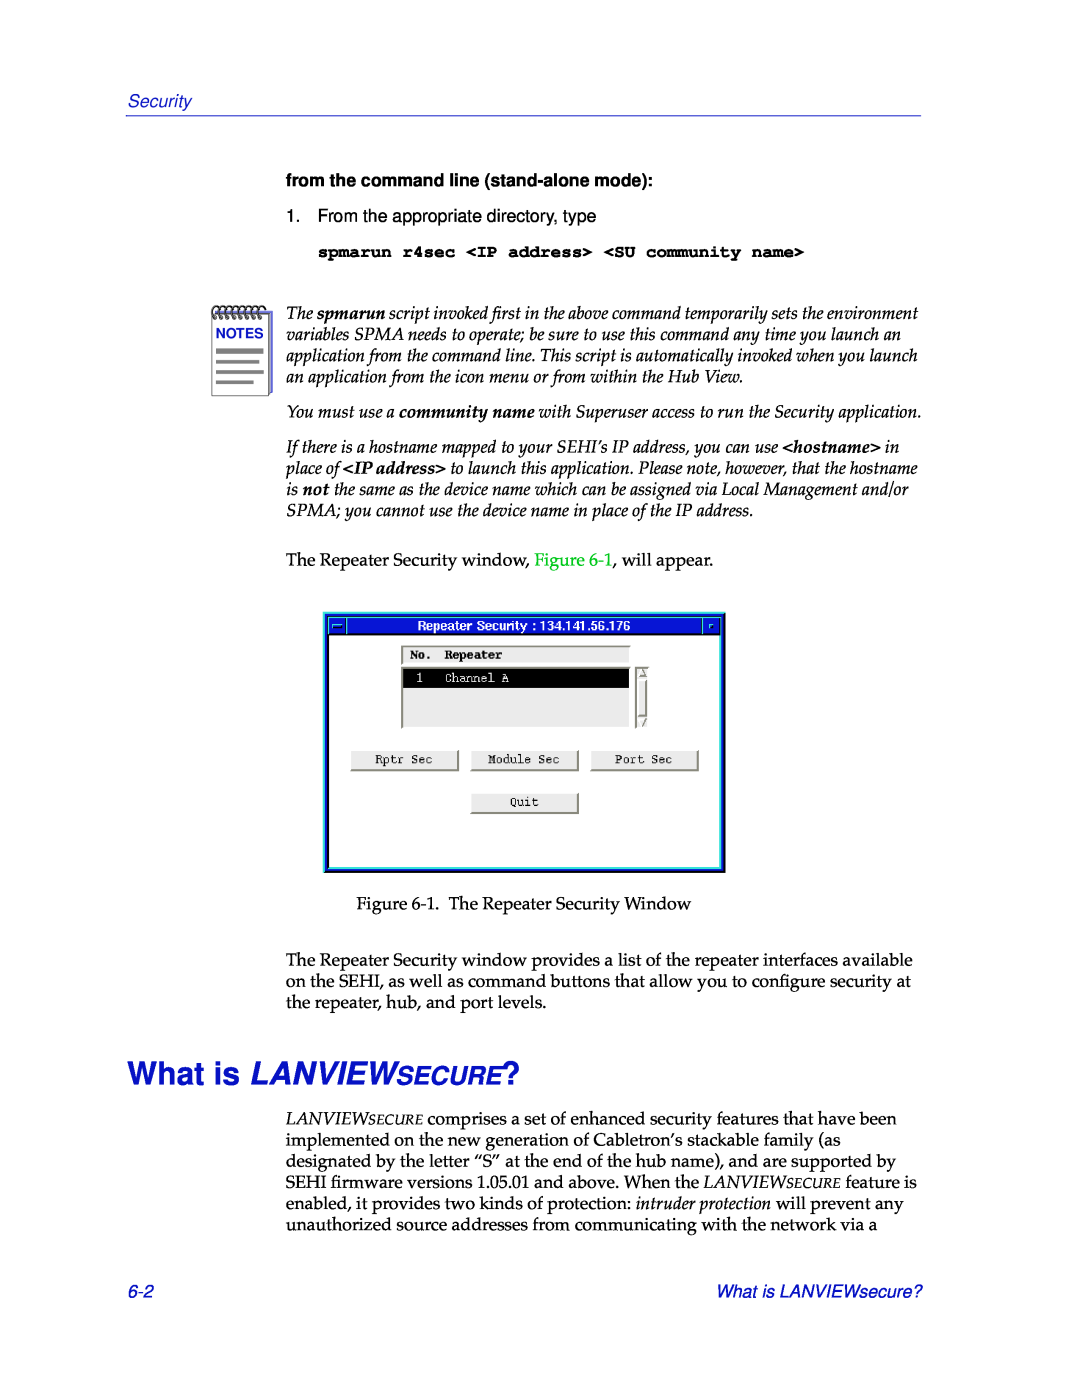 Cabletron Systems SEHI-32/34, SEHI-22/24 manual What is LANVIEWSECURE?, Security, spmarun r4sec IP address SU community name 